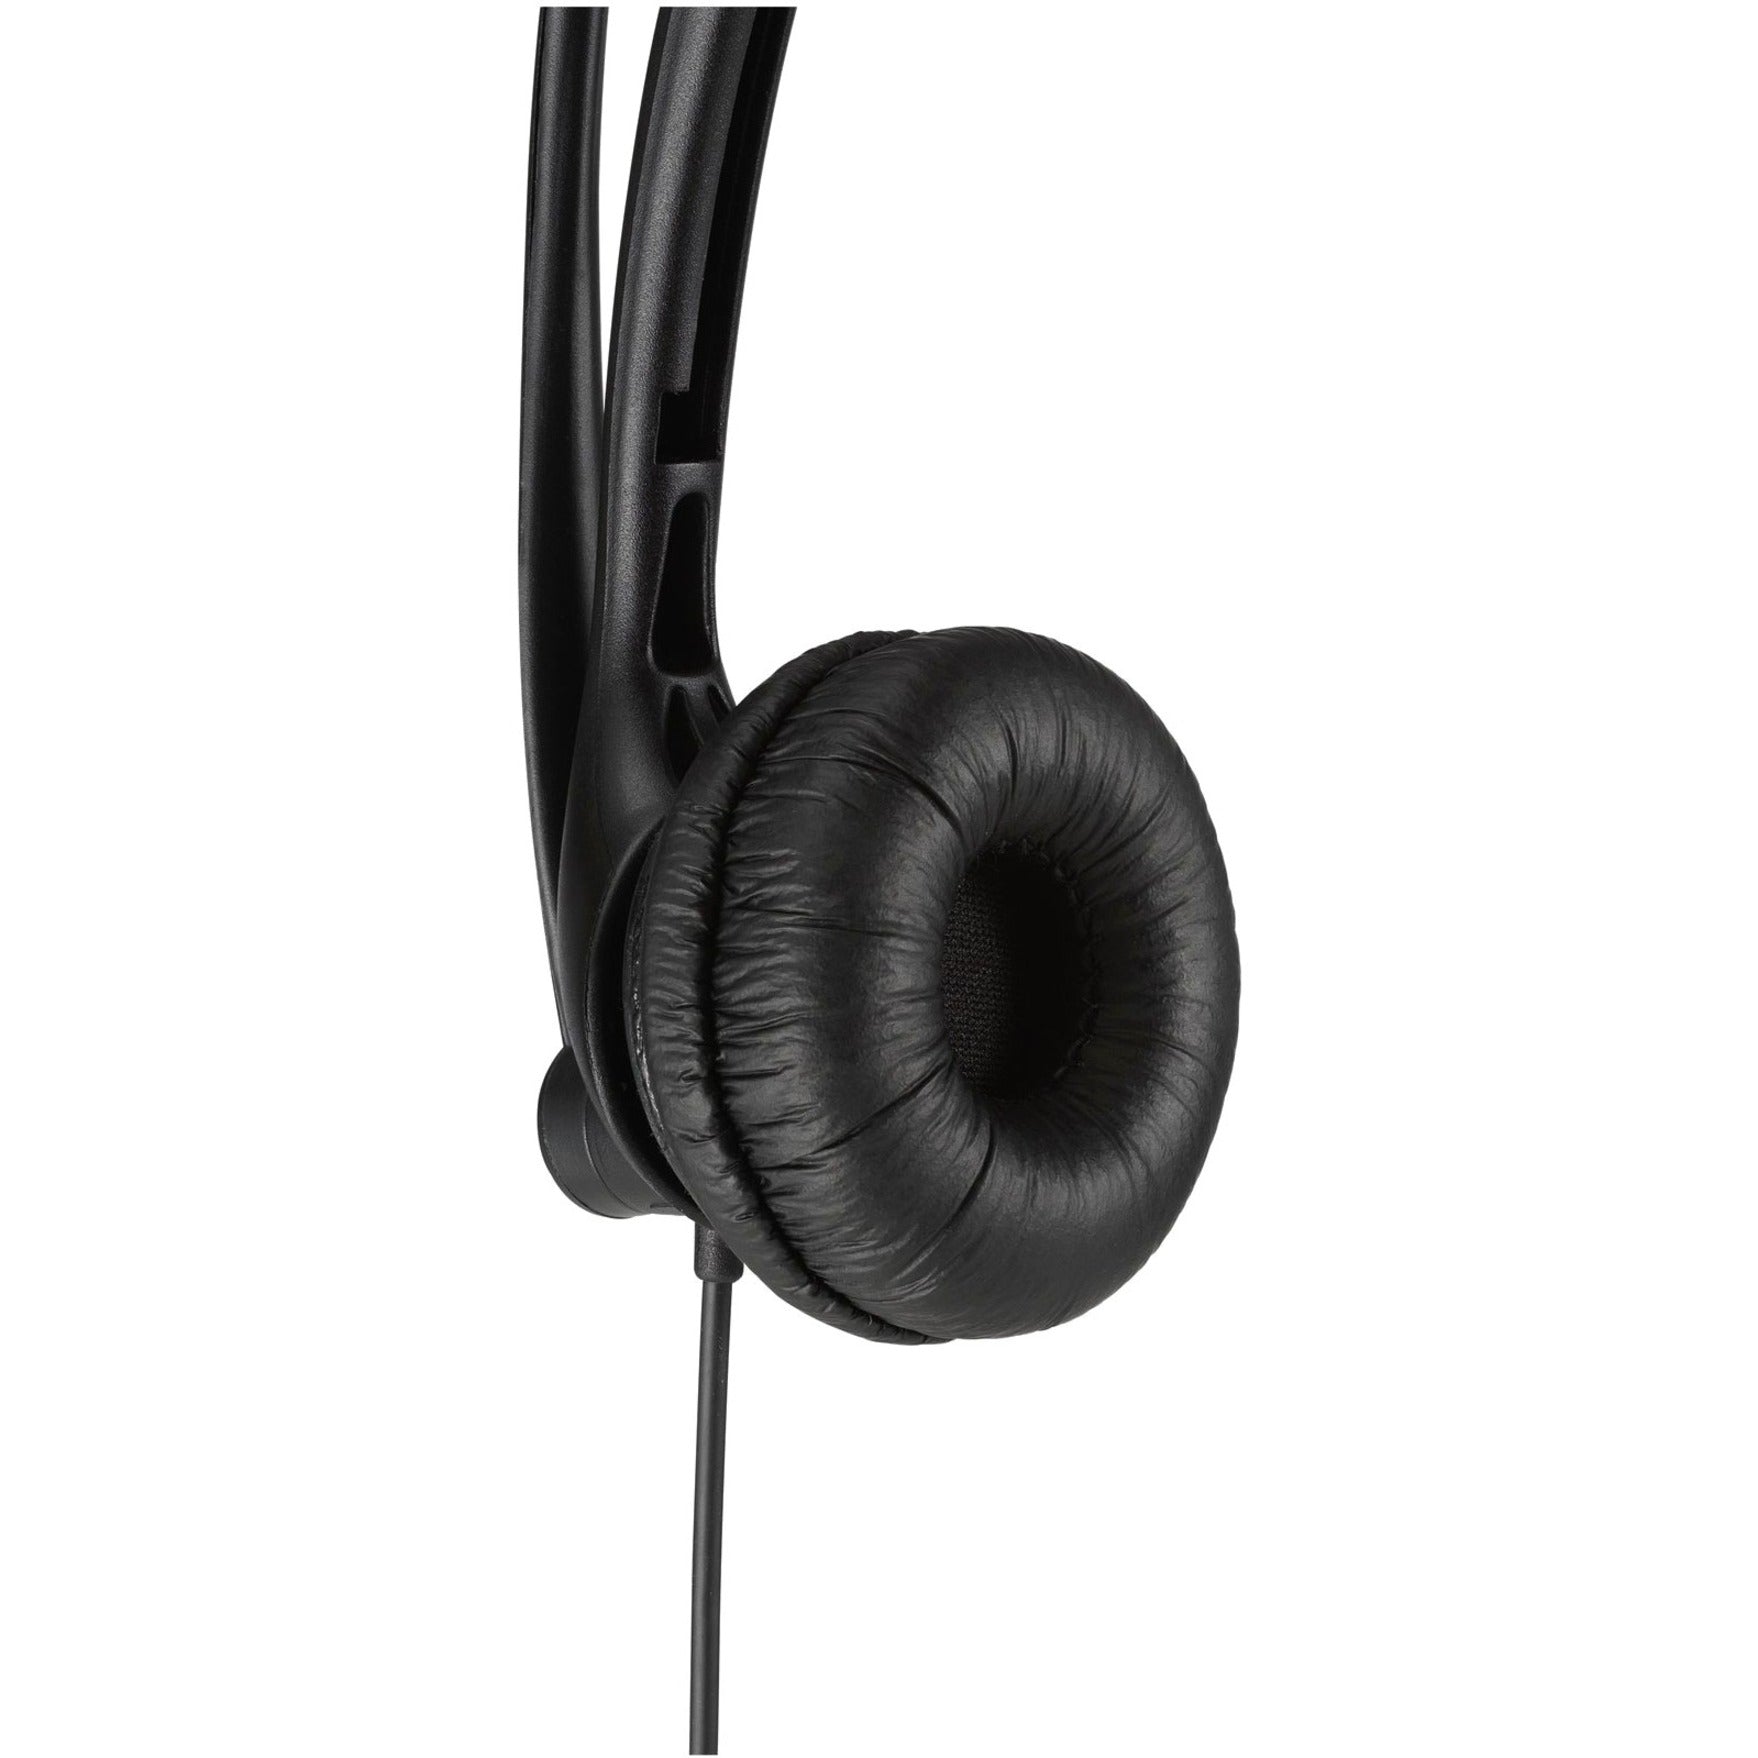 Kensington K80100WW Classic USB-A Mono Headset with Mic and Volume Control, Adjustable Headband, Plug and Play, Noise Cancelling